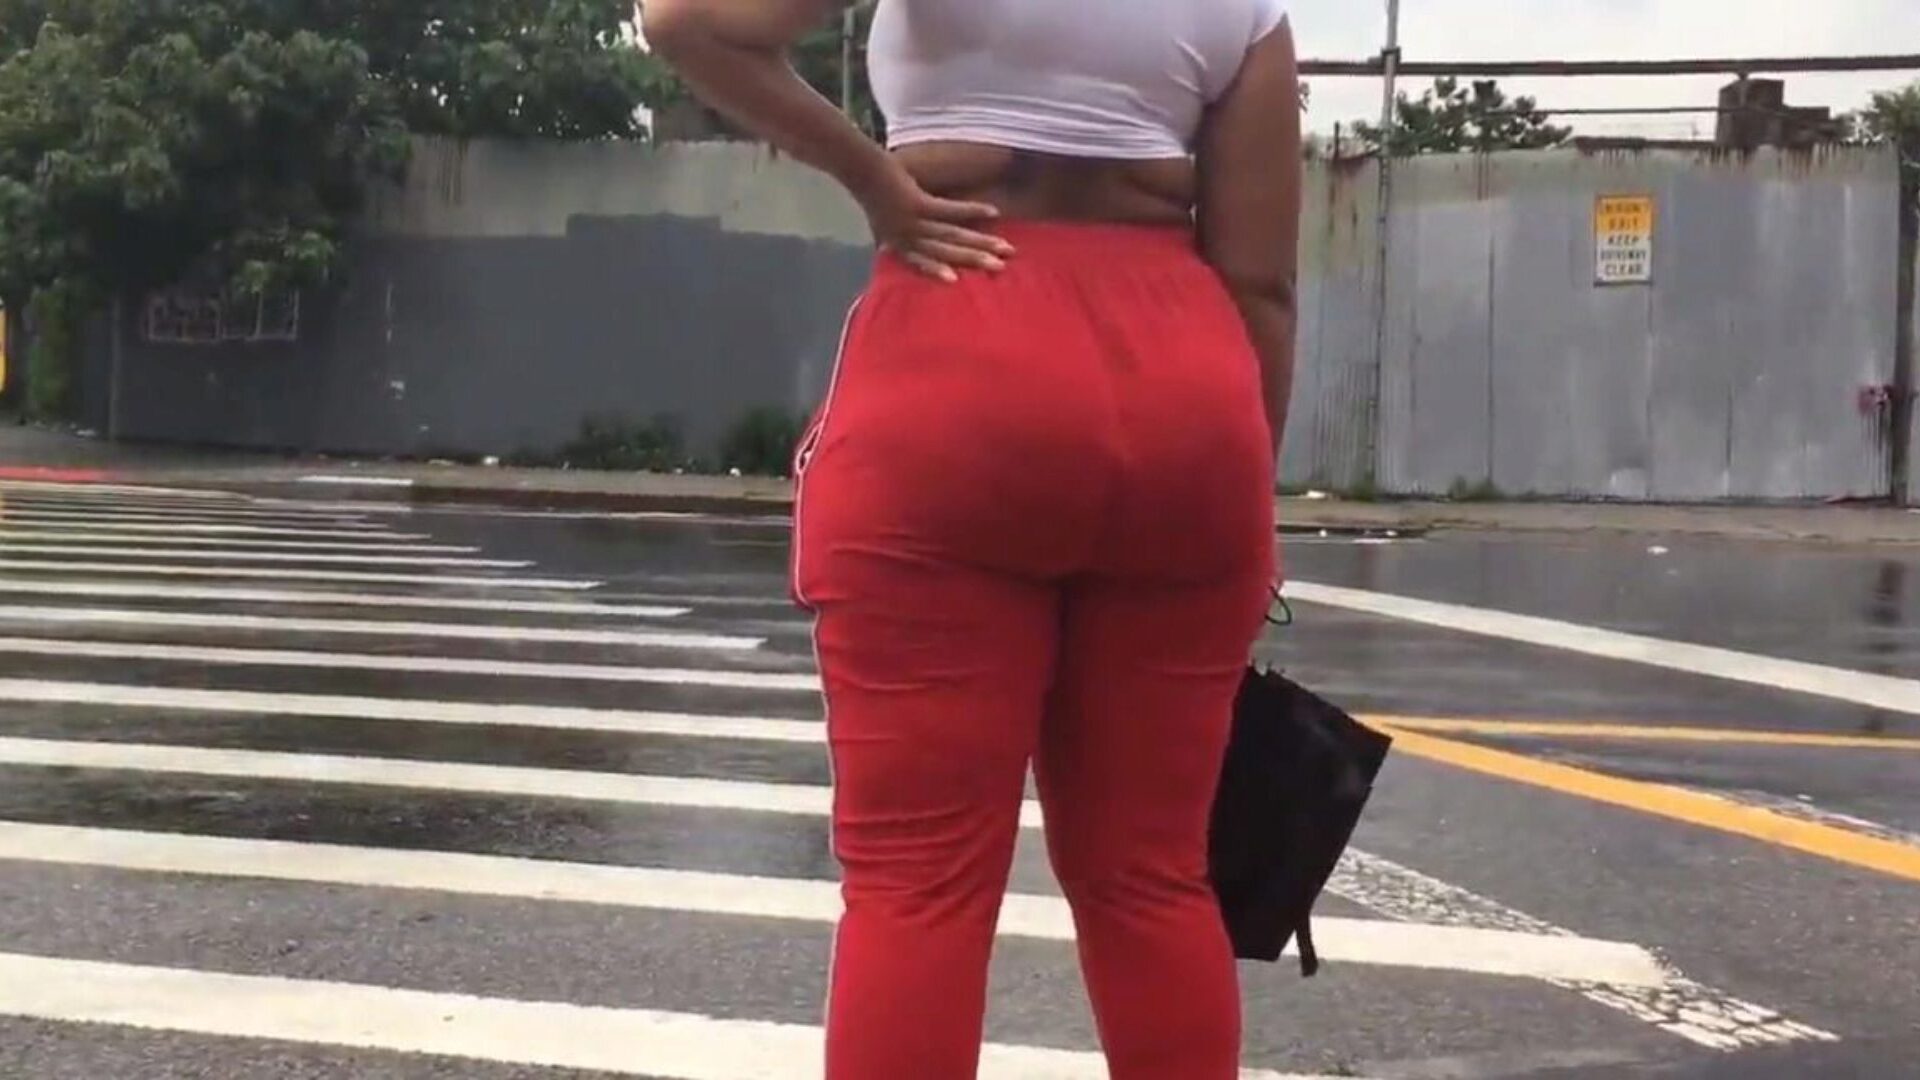 Tall Redbone Milf Ass in See-thru Spandex Part 4 This was the 3rd time that I caught the (in)famous Rumpalicious final year She finally did drizzle and confronted me about it but that was about it everybody now caught her in any case lol...Enjoy!!!